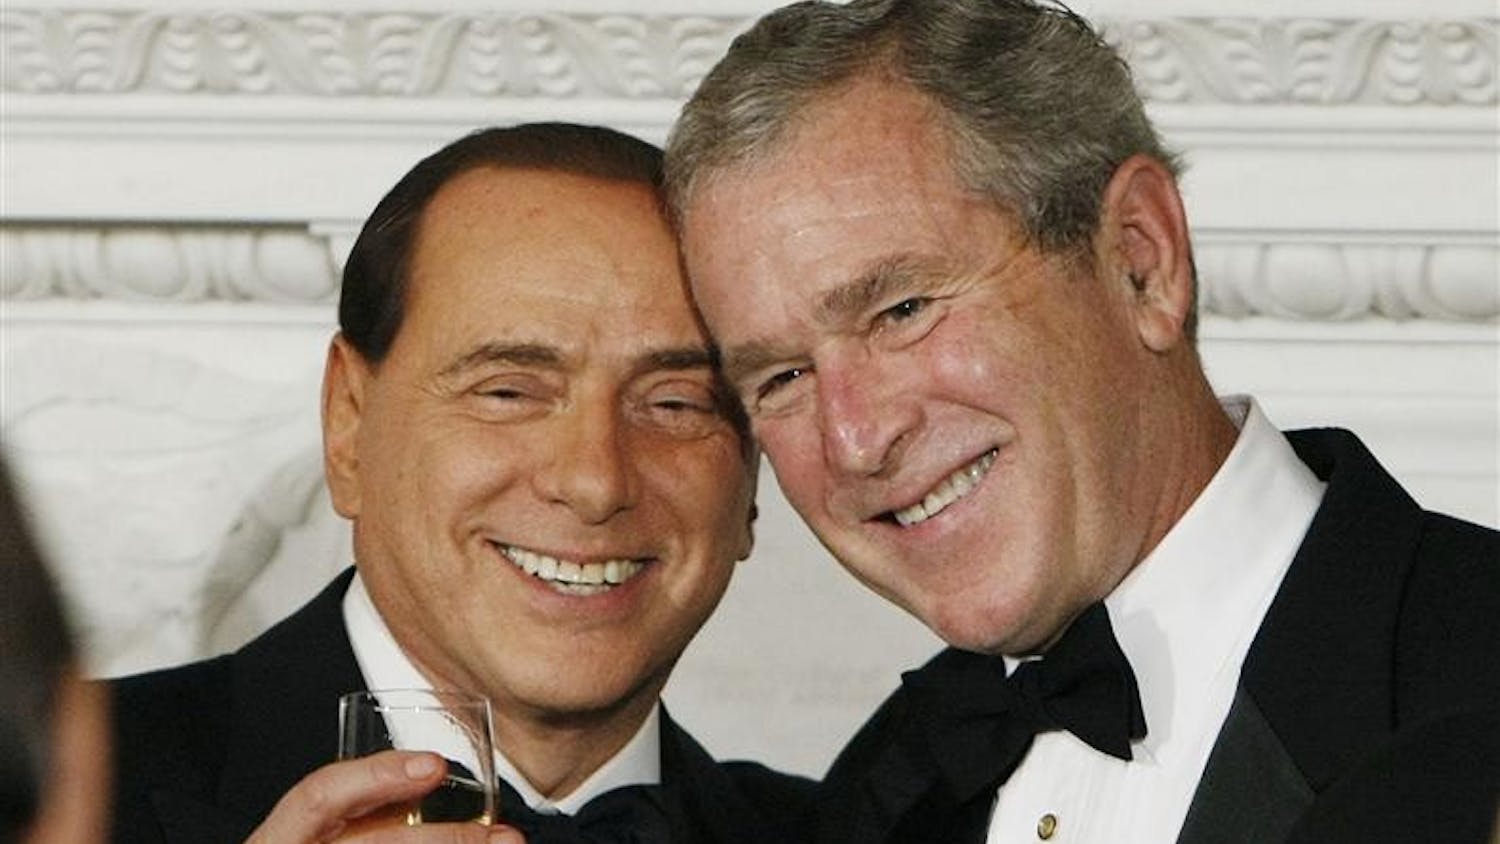 President Bush, right, toasts with the Prime Minister of Italy Silvio Berlusconi, left, during an Official Dinner in the State Dining Room on Monday in Washington. 